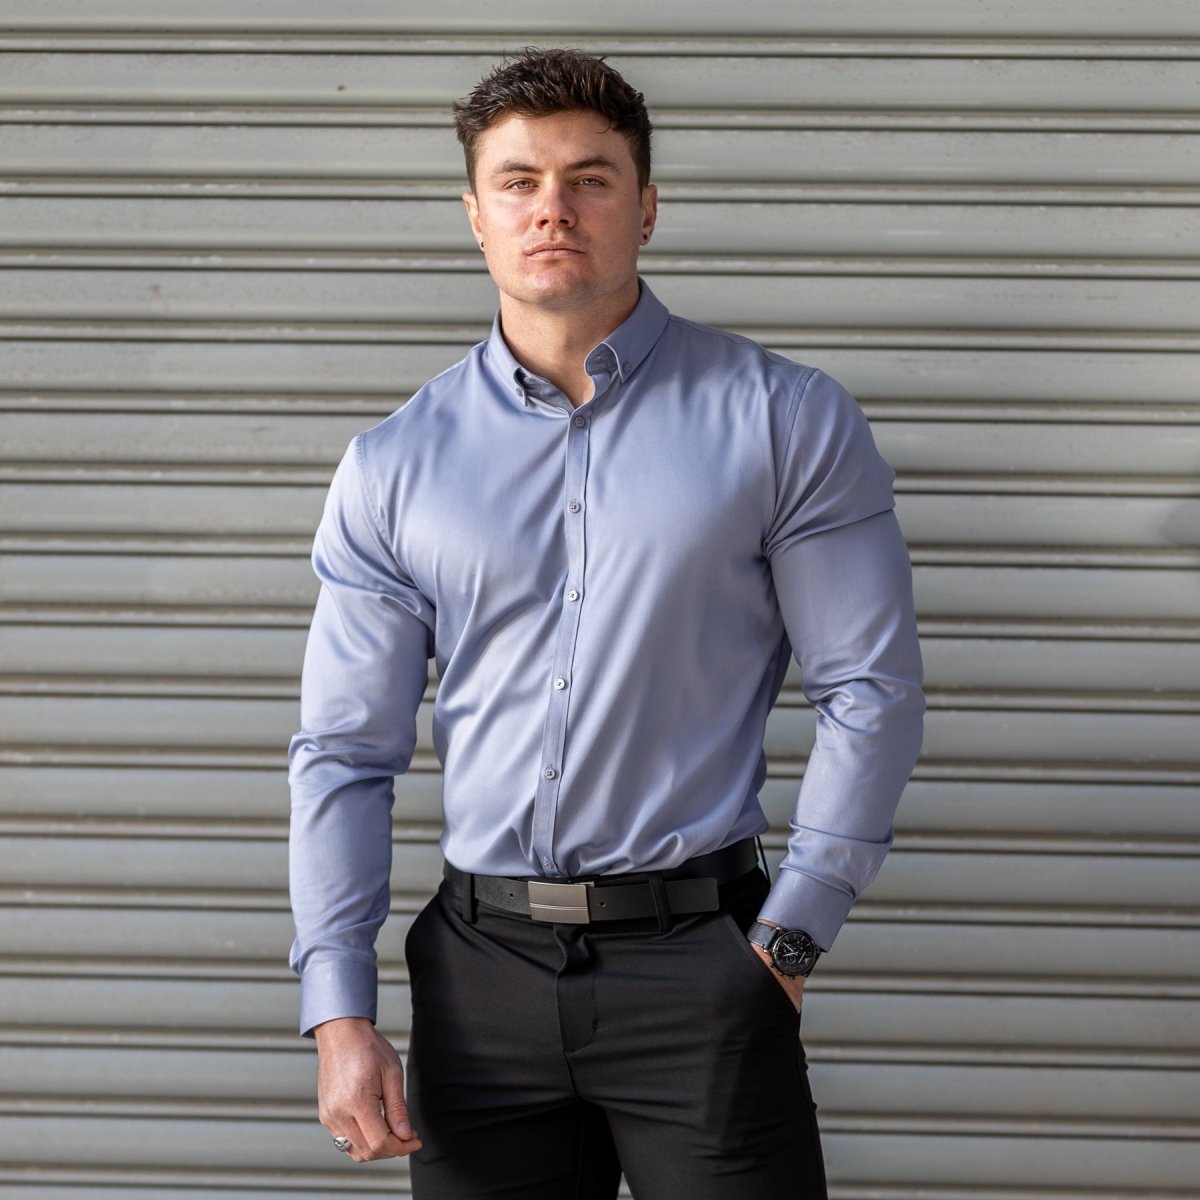 Athletic Fit Shirt vs Slim Fit Dress Shirts - Which Fit Type Suits